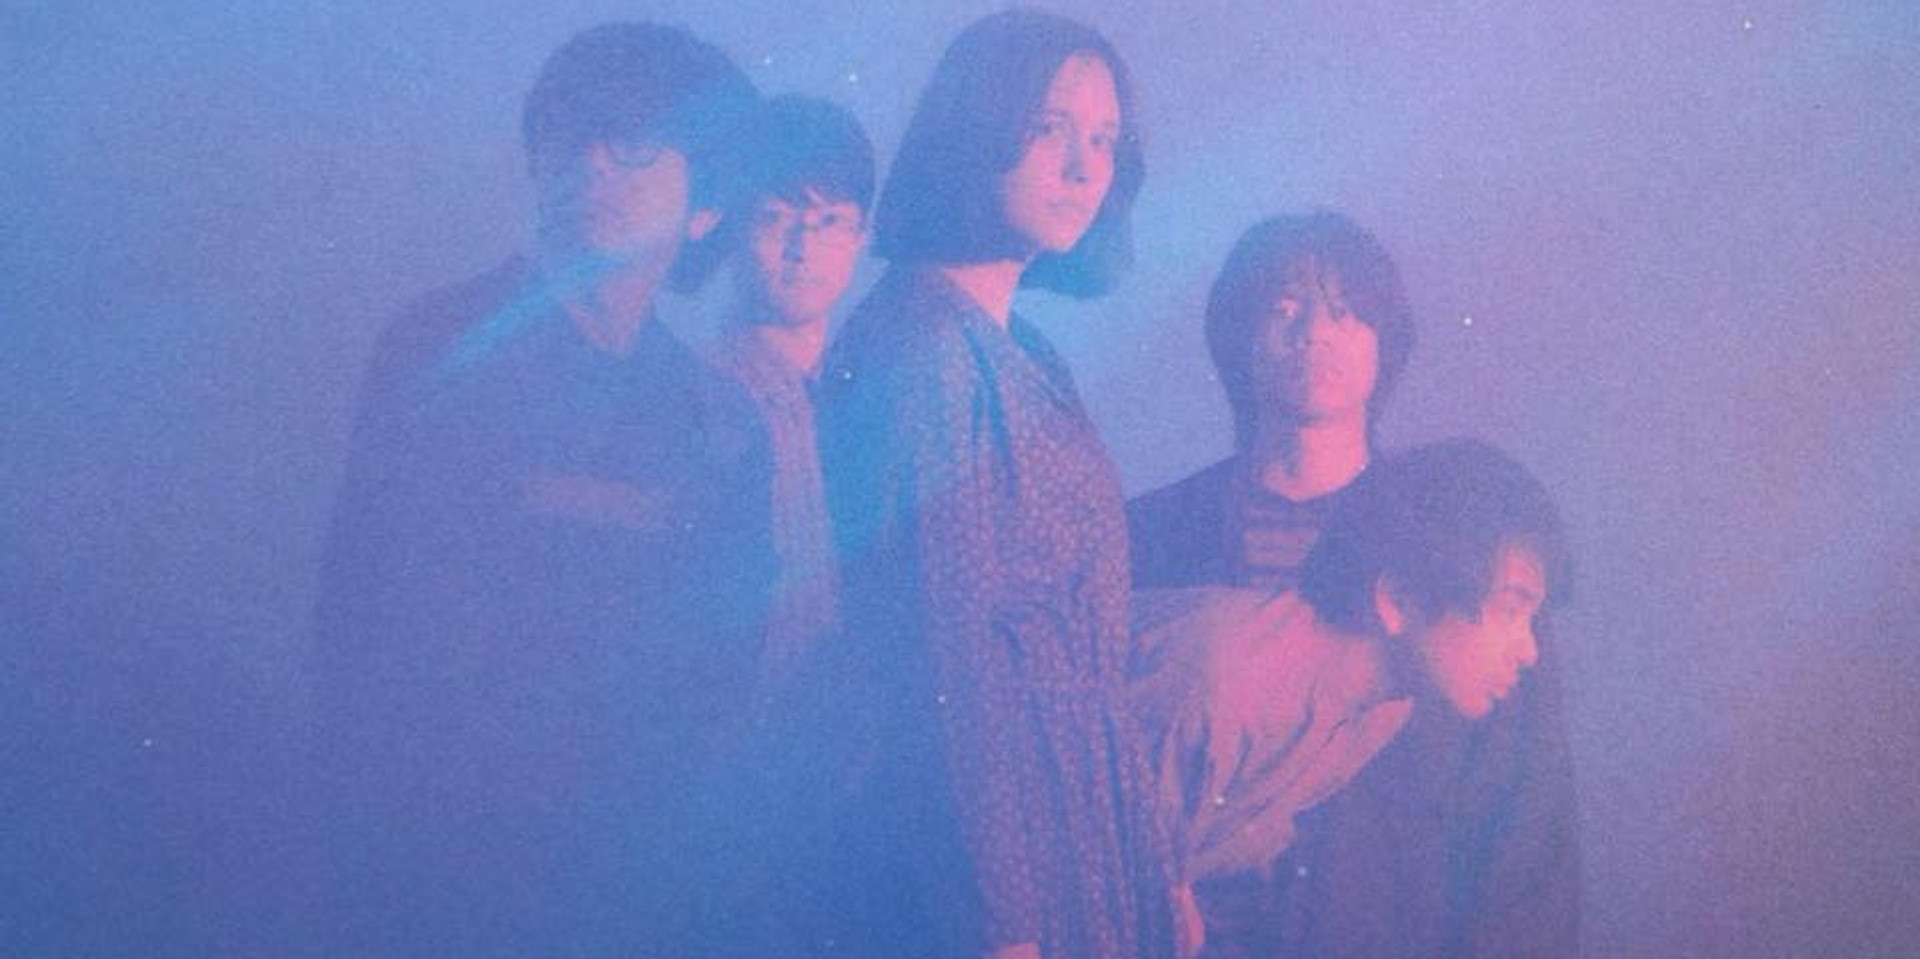 For Tracy Hyde's New Young City: A track-by-track guide